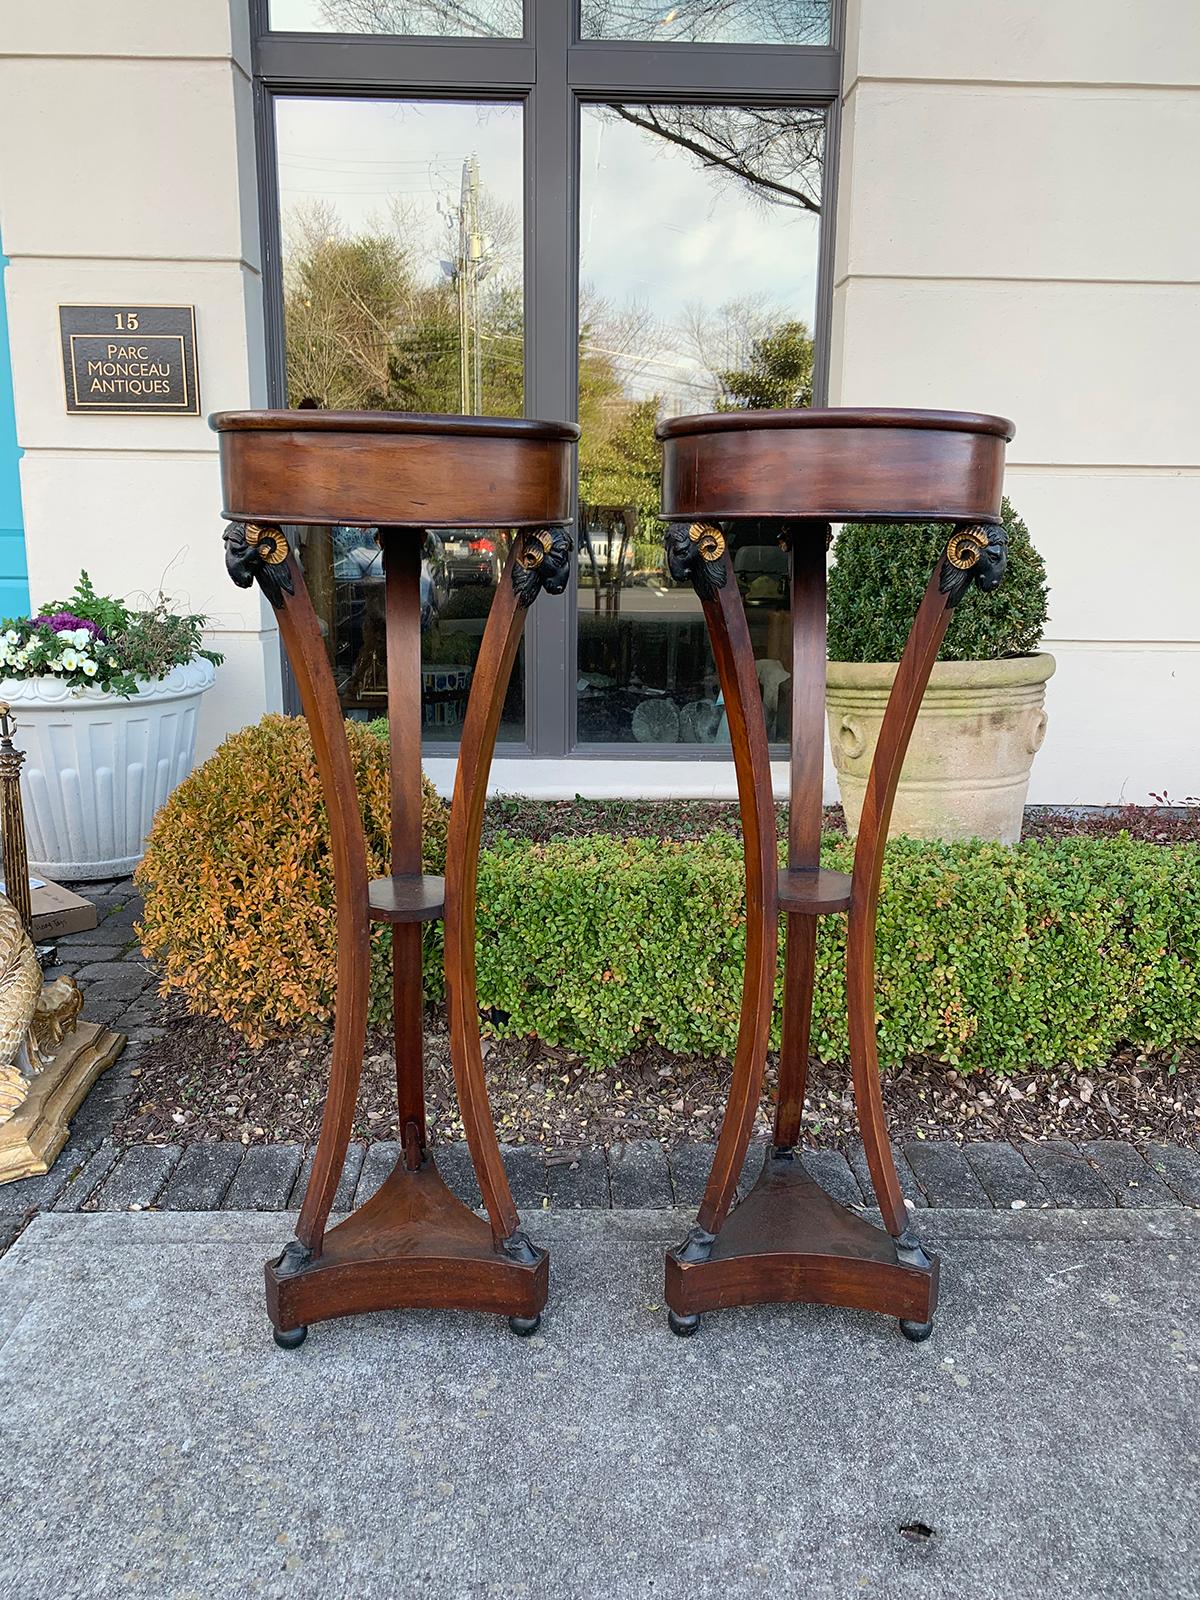 Pair early 19th century period Italian Directoire torchieres, circa 1820.